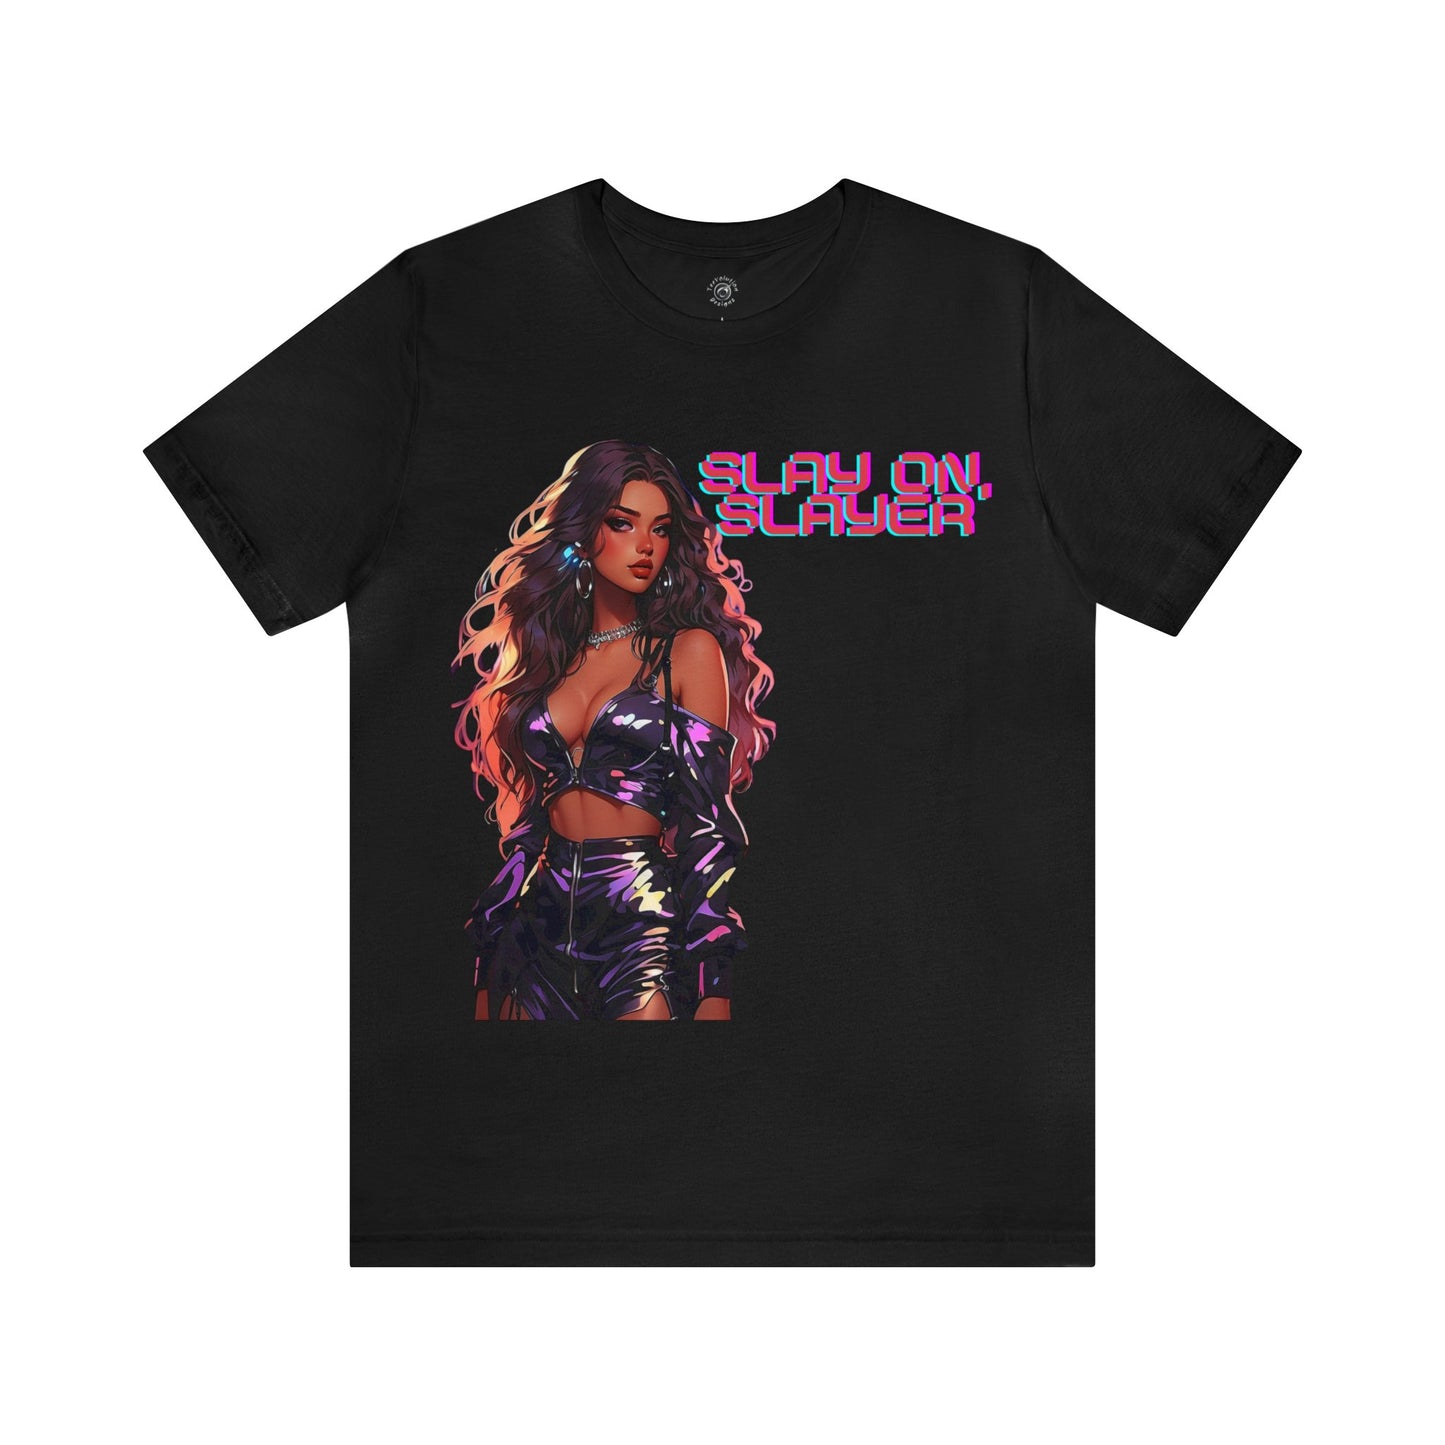 Slay On, Slayer | HD Graphic | Female Empowerment | Female History Month |